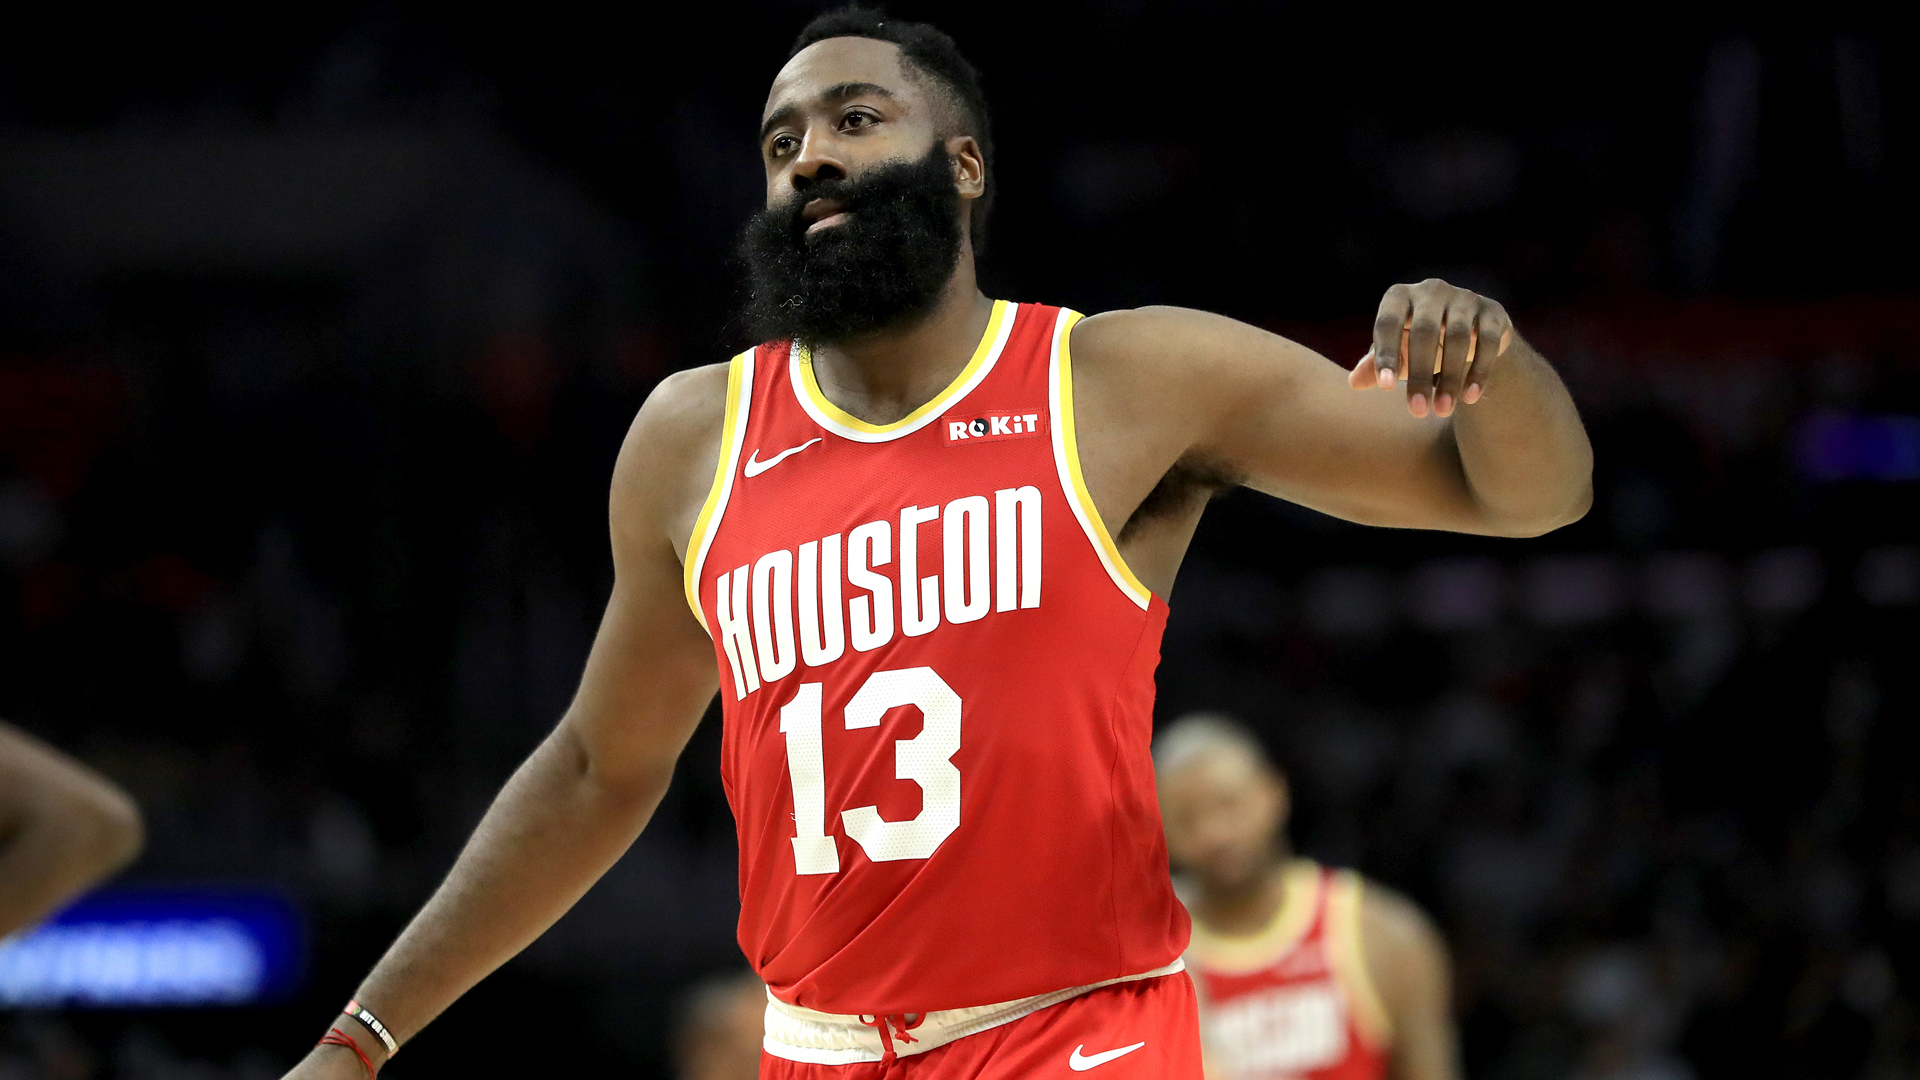 Houston Rockets star James Harden finished with 60 points in a thrashing of the Atlanta Hawks.